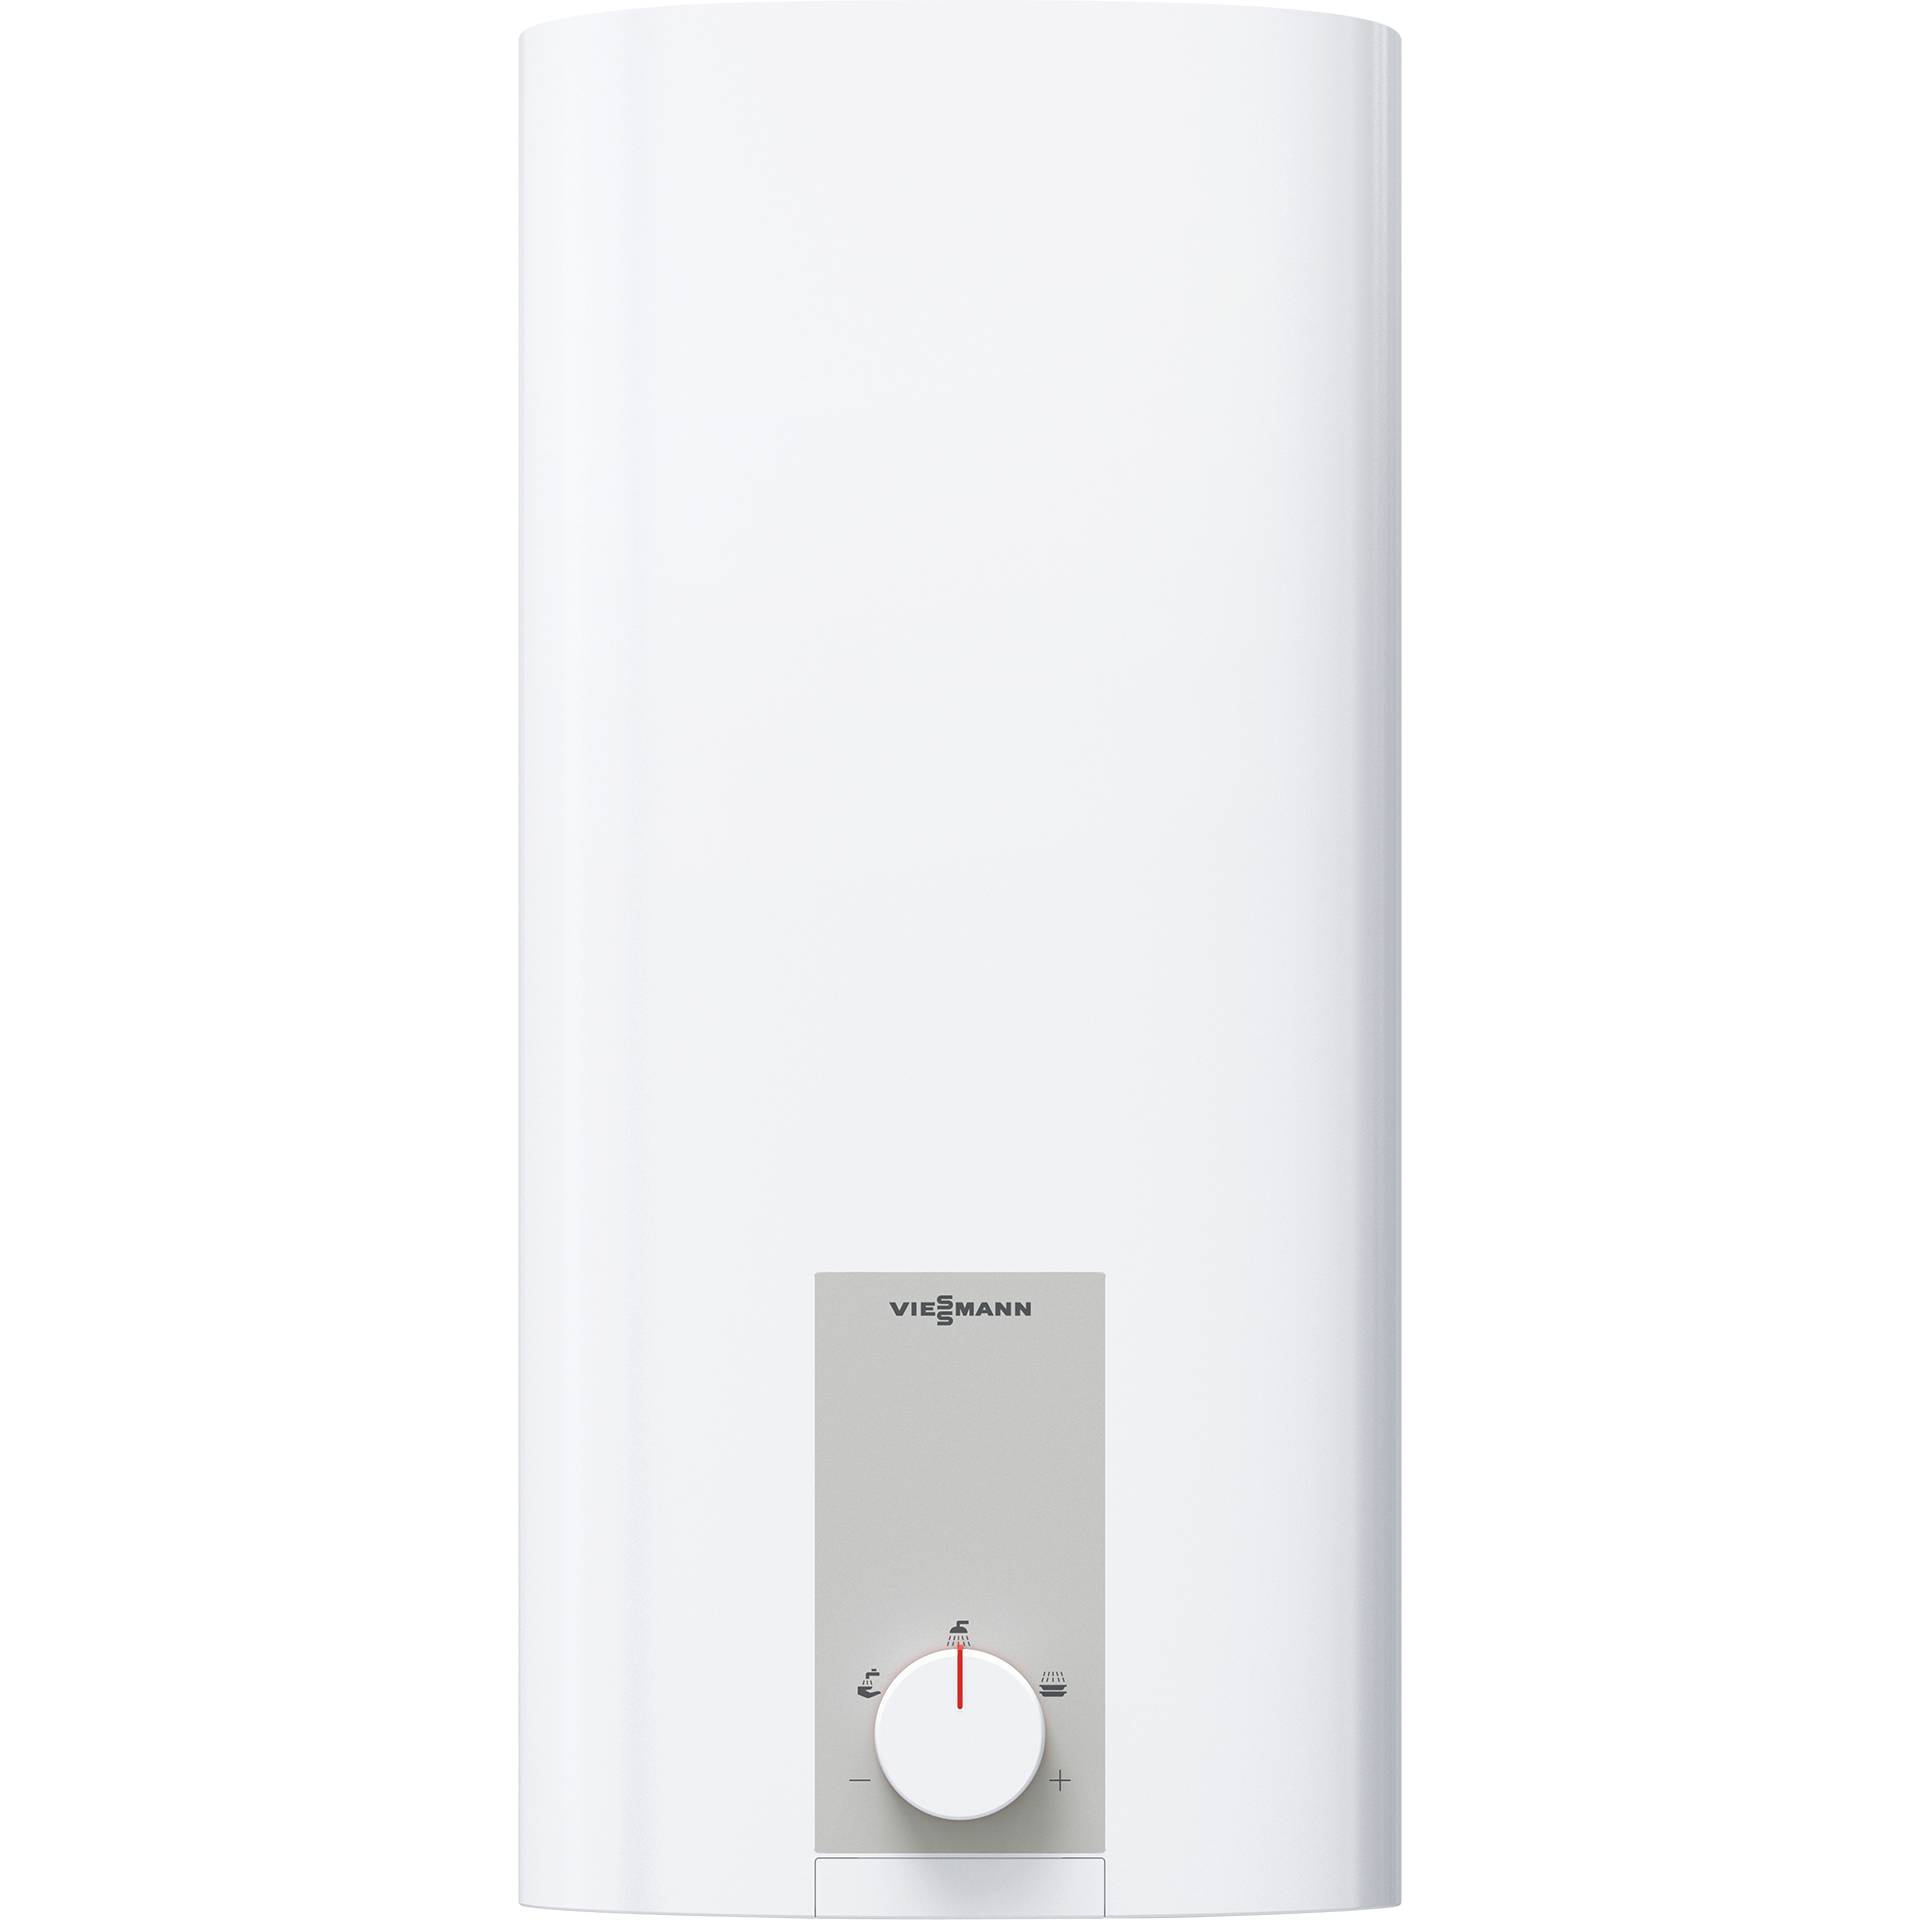 https://www.viessmann.at/content/dam/public-brands/master/products/elektro/vitotherm/Vitotherm-electric-water-heater-product-image-1-1.png/_jcr_content/renditions/original./Vitotherm-electric-water-heater-product-image-1-1.png